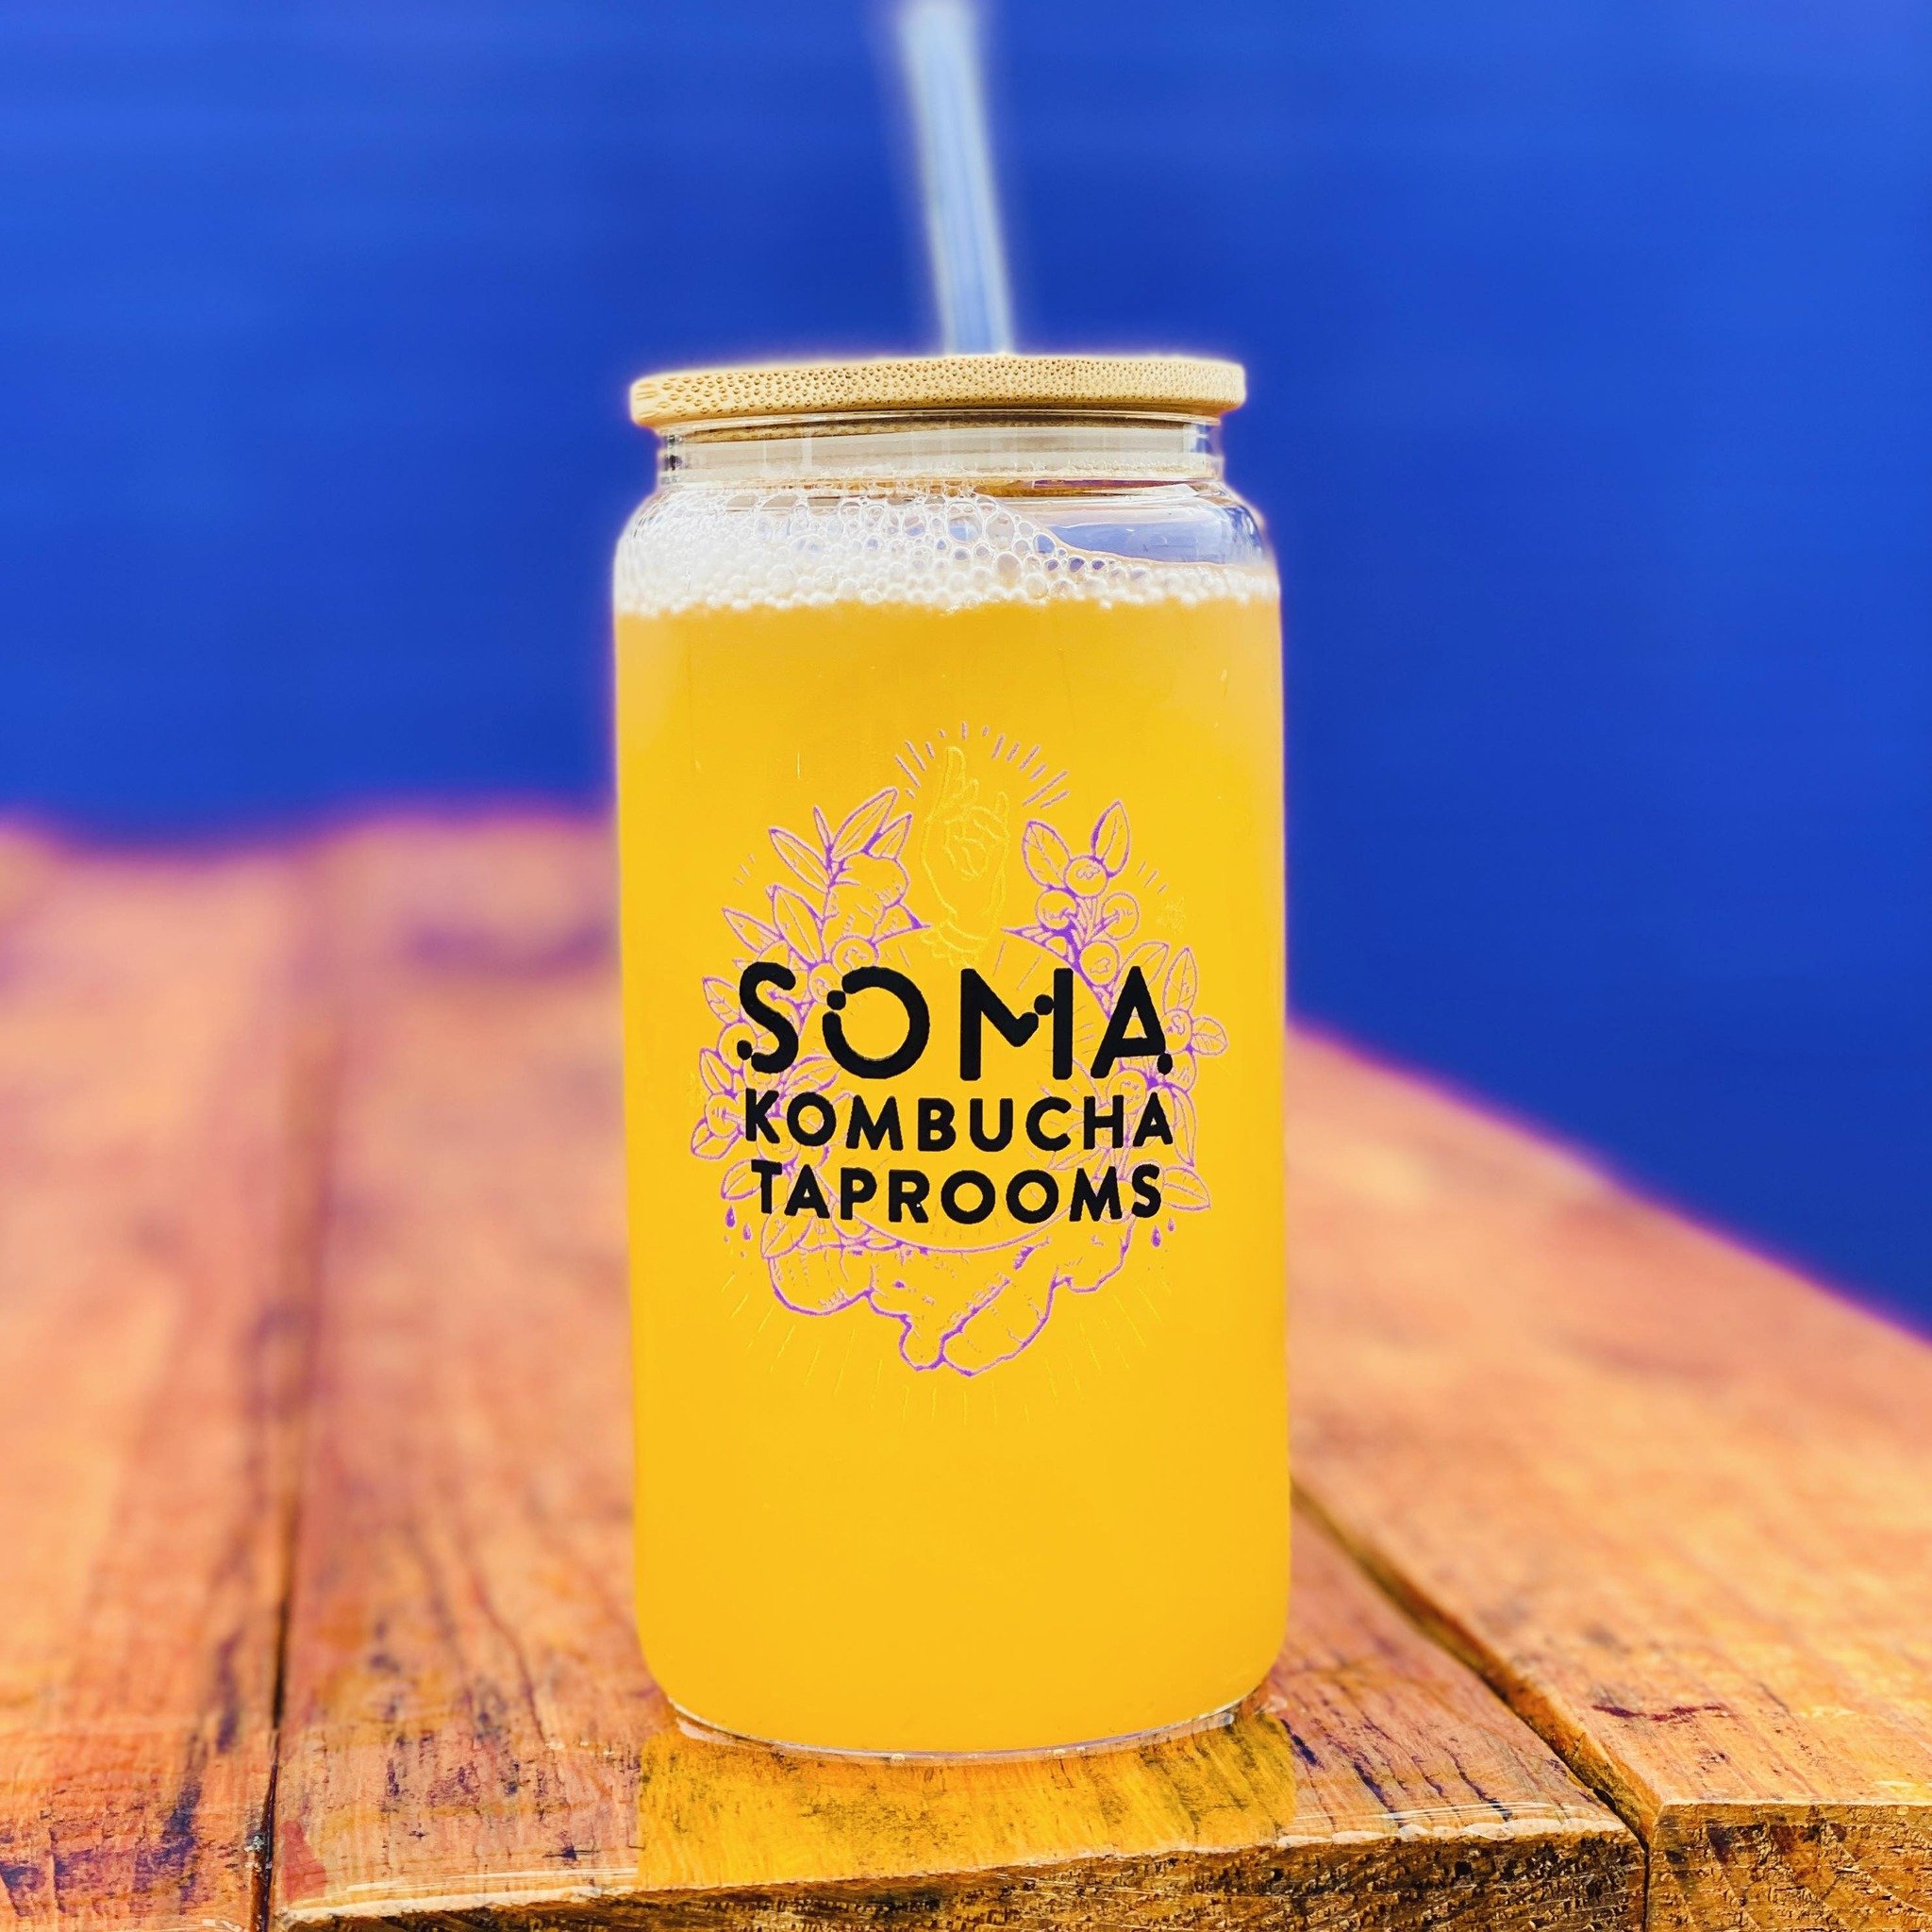 🌿 Introducing our latest addition to the Soma Kombucha Taproom family: Reusable Glasses with Lid and Straw! 🥤♻️

Say goodbye to single-use cups and hello to sustainability with our adorable and eco-friendly glasses. Made with love and care for both